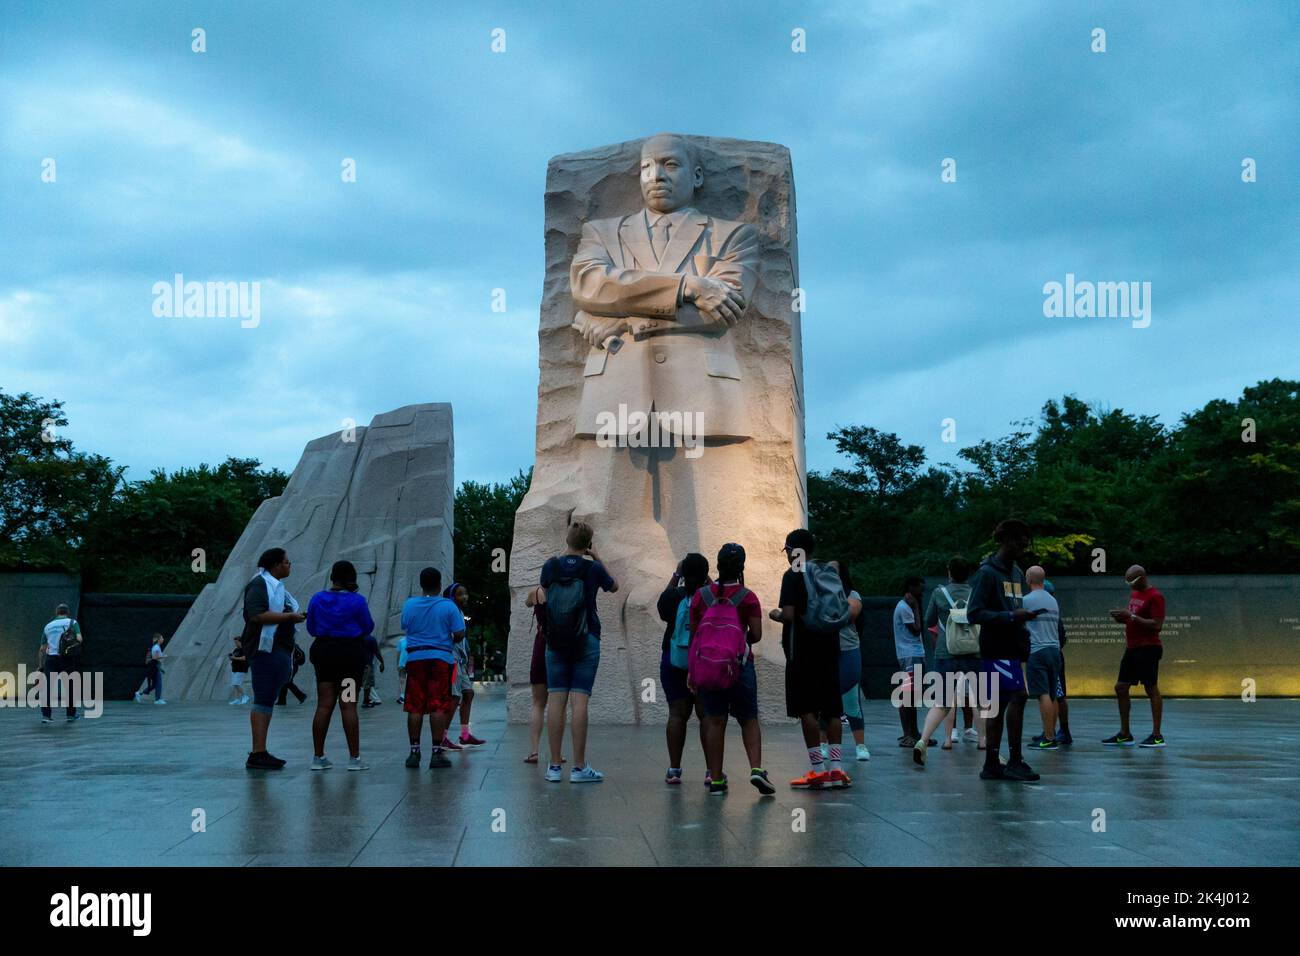 The Martin Luther King, Jr. Memorial is a national memorial located in West Potomac Park next to the National Mall in Washington, D.C., United States. It covers four acres  and includes the Stone of Hope, a granite statue of Civil Rights Movement leader Martin Luther King Jr. carved by sculptor Lei Yixin. The inspiration for the memorial design is a line from King's 'I Have a Dream' speech: 'Out of the mountain of despair, a stone of hope.' The memorial opened to the public on August 22, 2011, after more than two decades of planning, fund-raising, and construction. Stock Photo